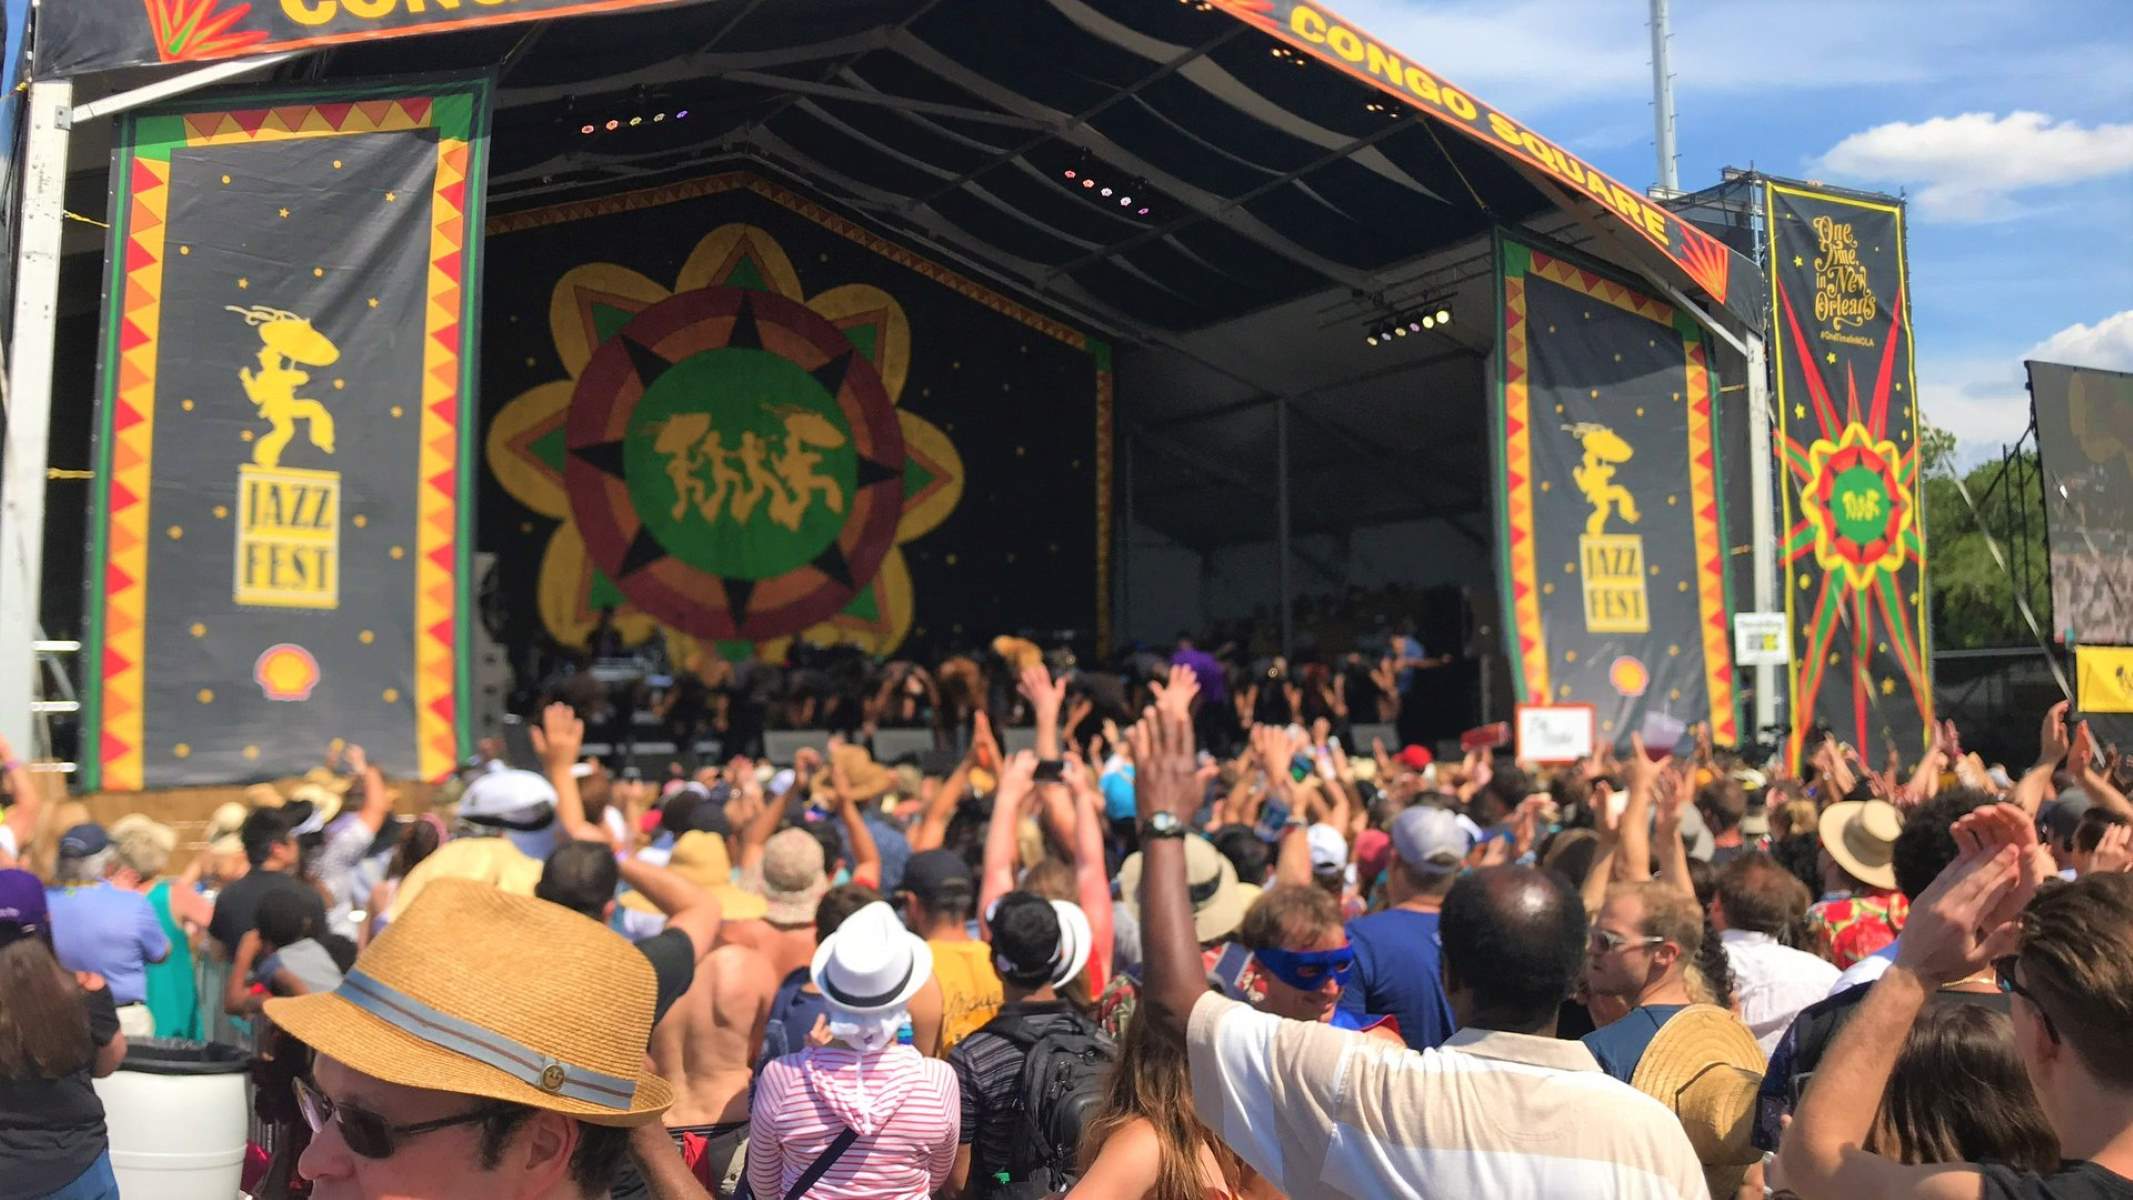 What Are The Dates Of Jazz Fest 2022